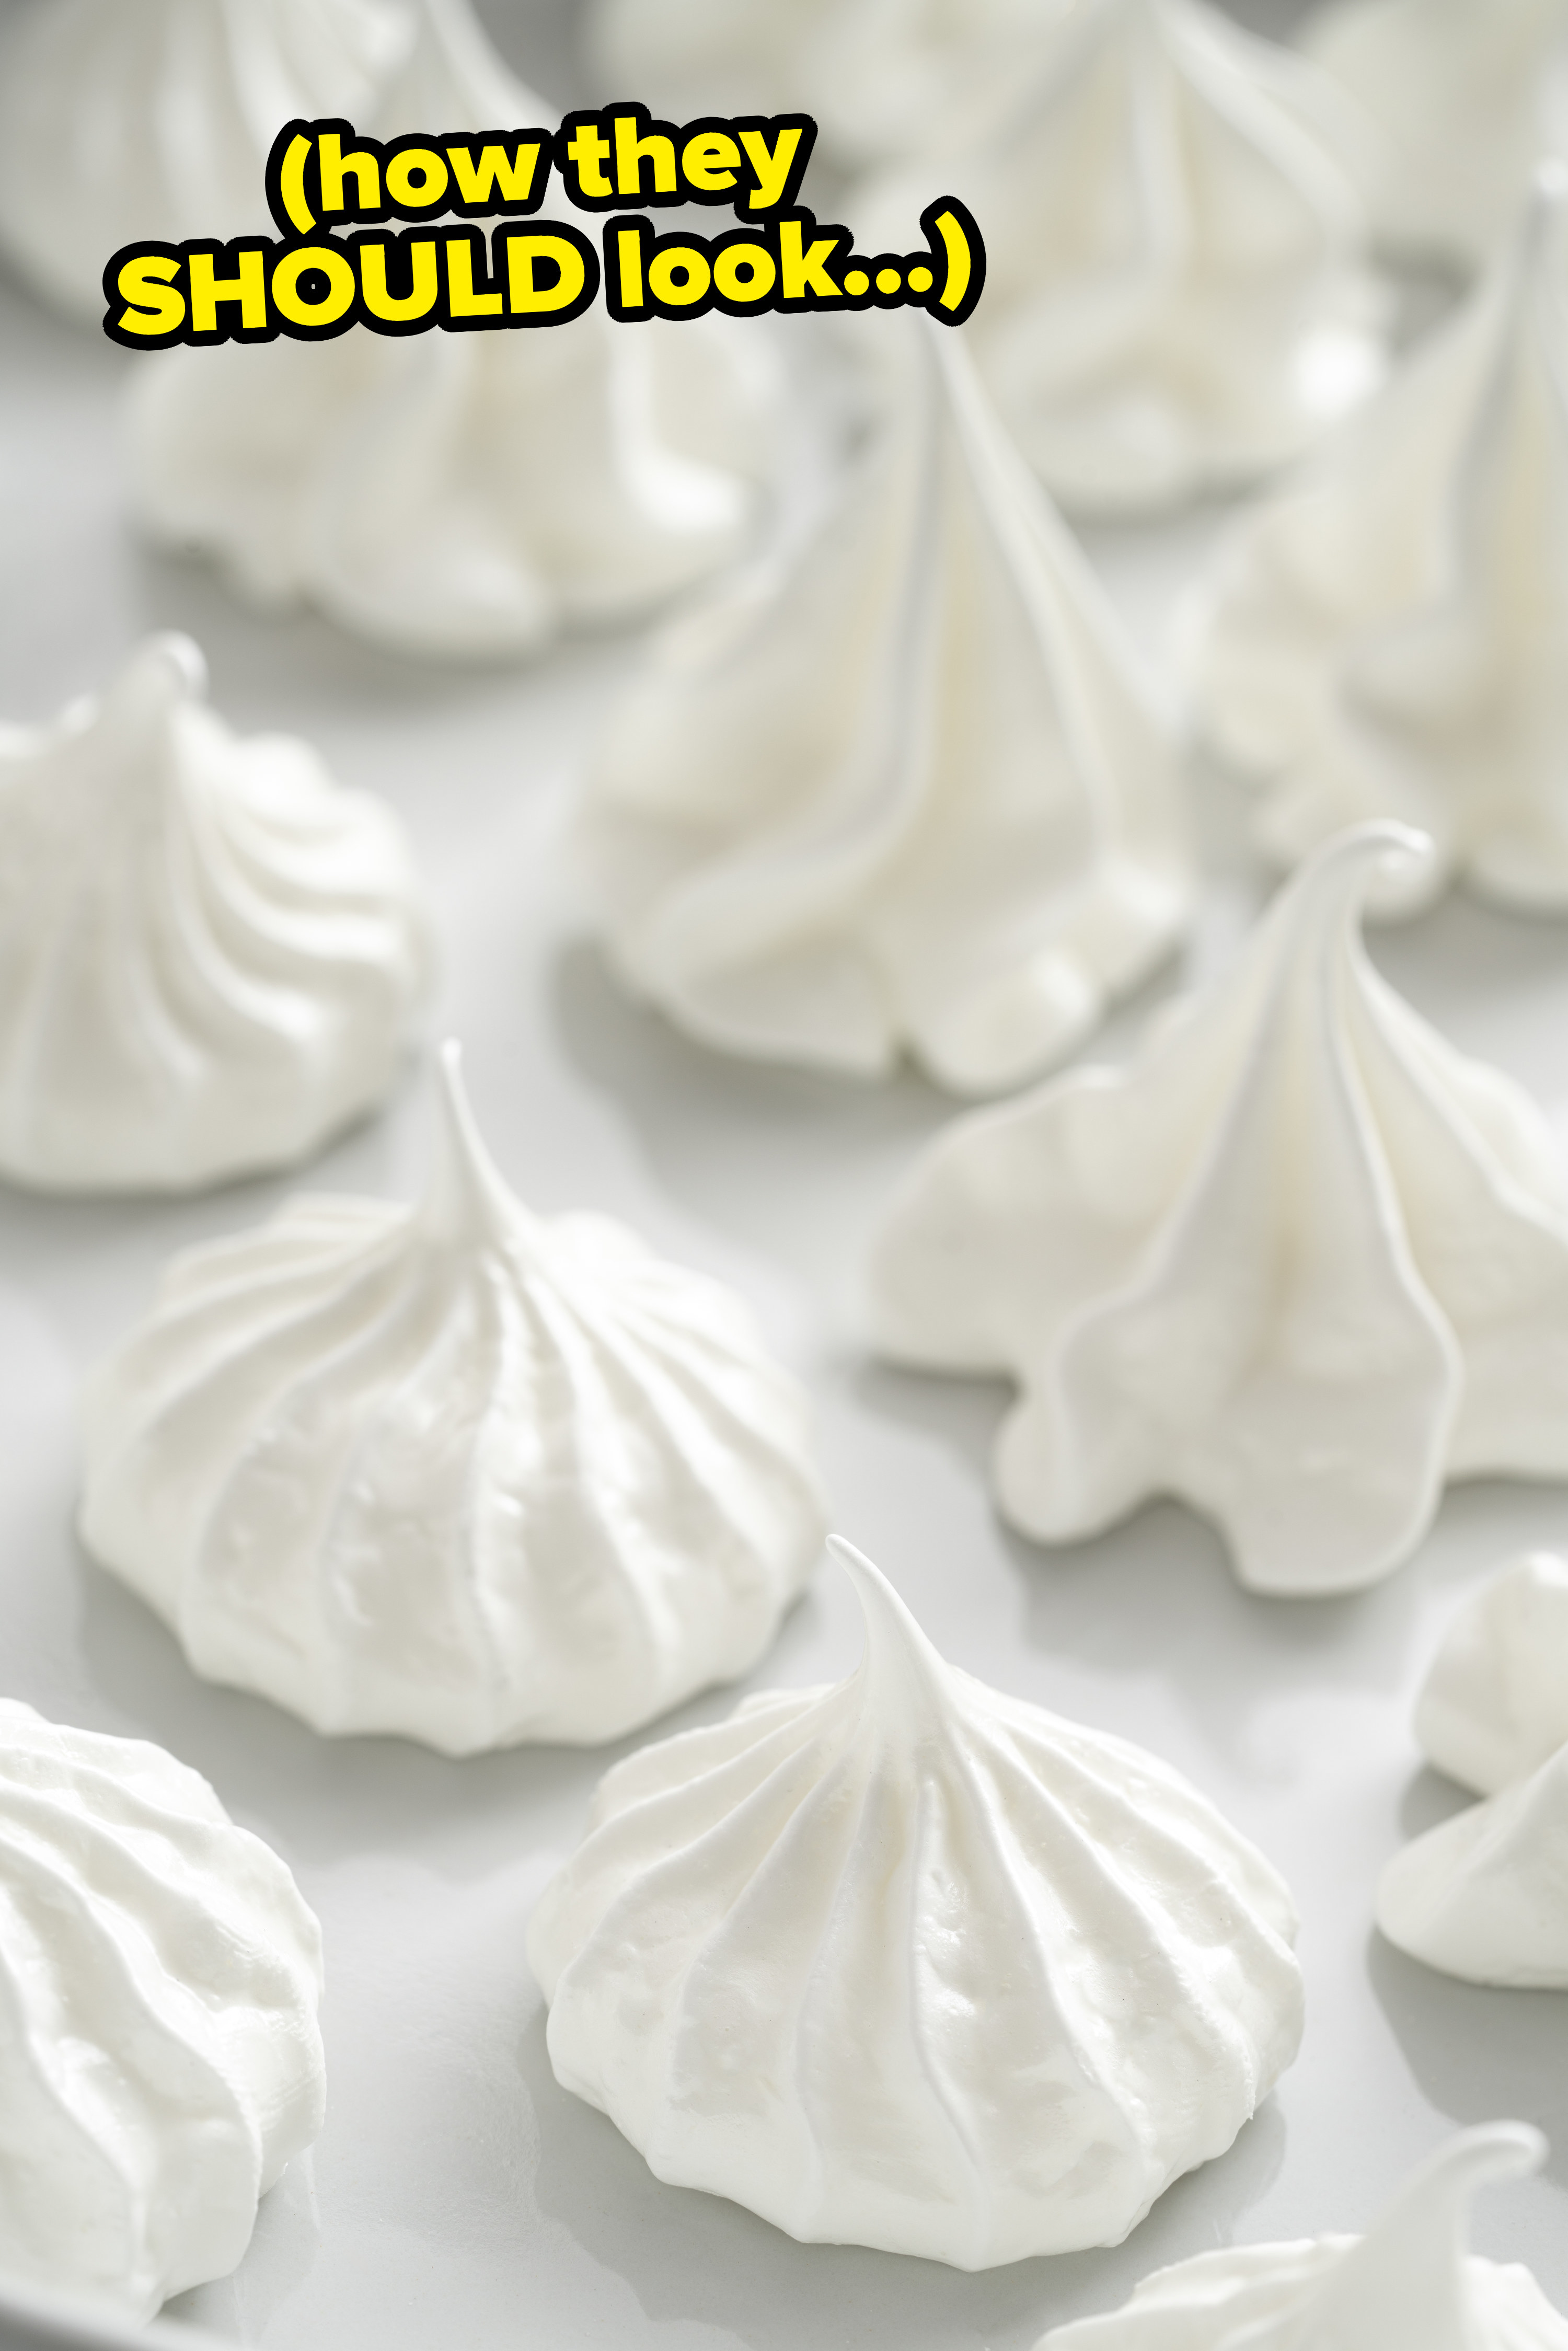 White meringues on a sheet tray with the text: &quot;How they SHOULD look&quot;